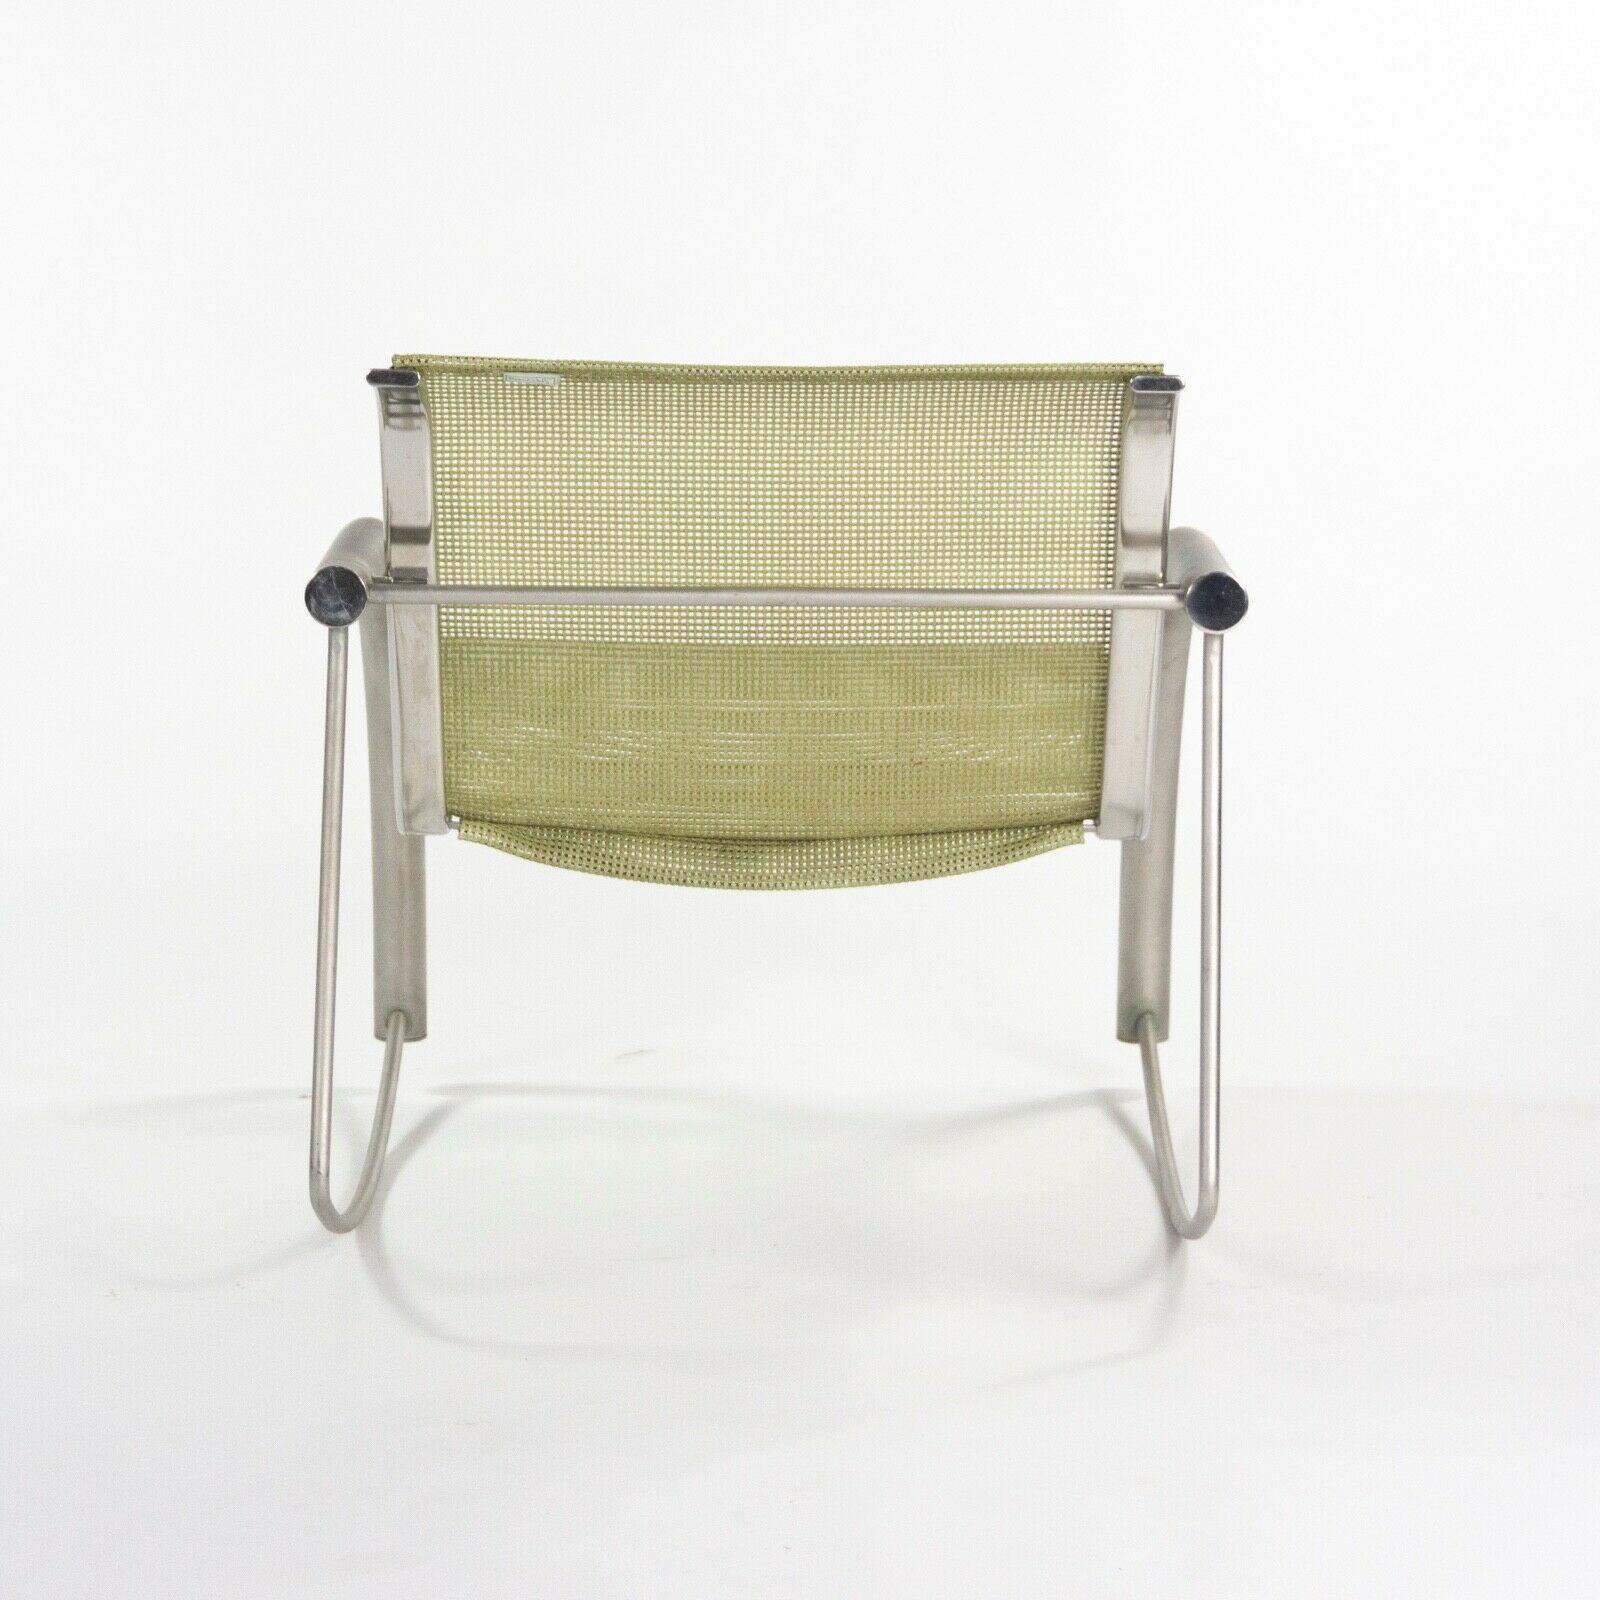 Contemporary Prototype Richard Schultz 2002 Collection Stainless Steel & Mesh Rocking Chair For Sale